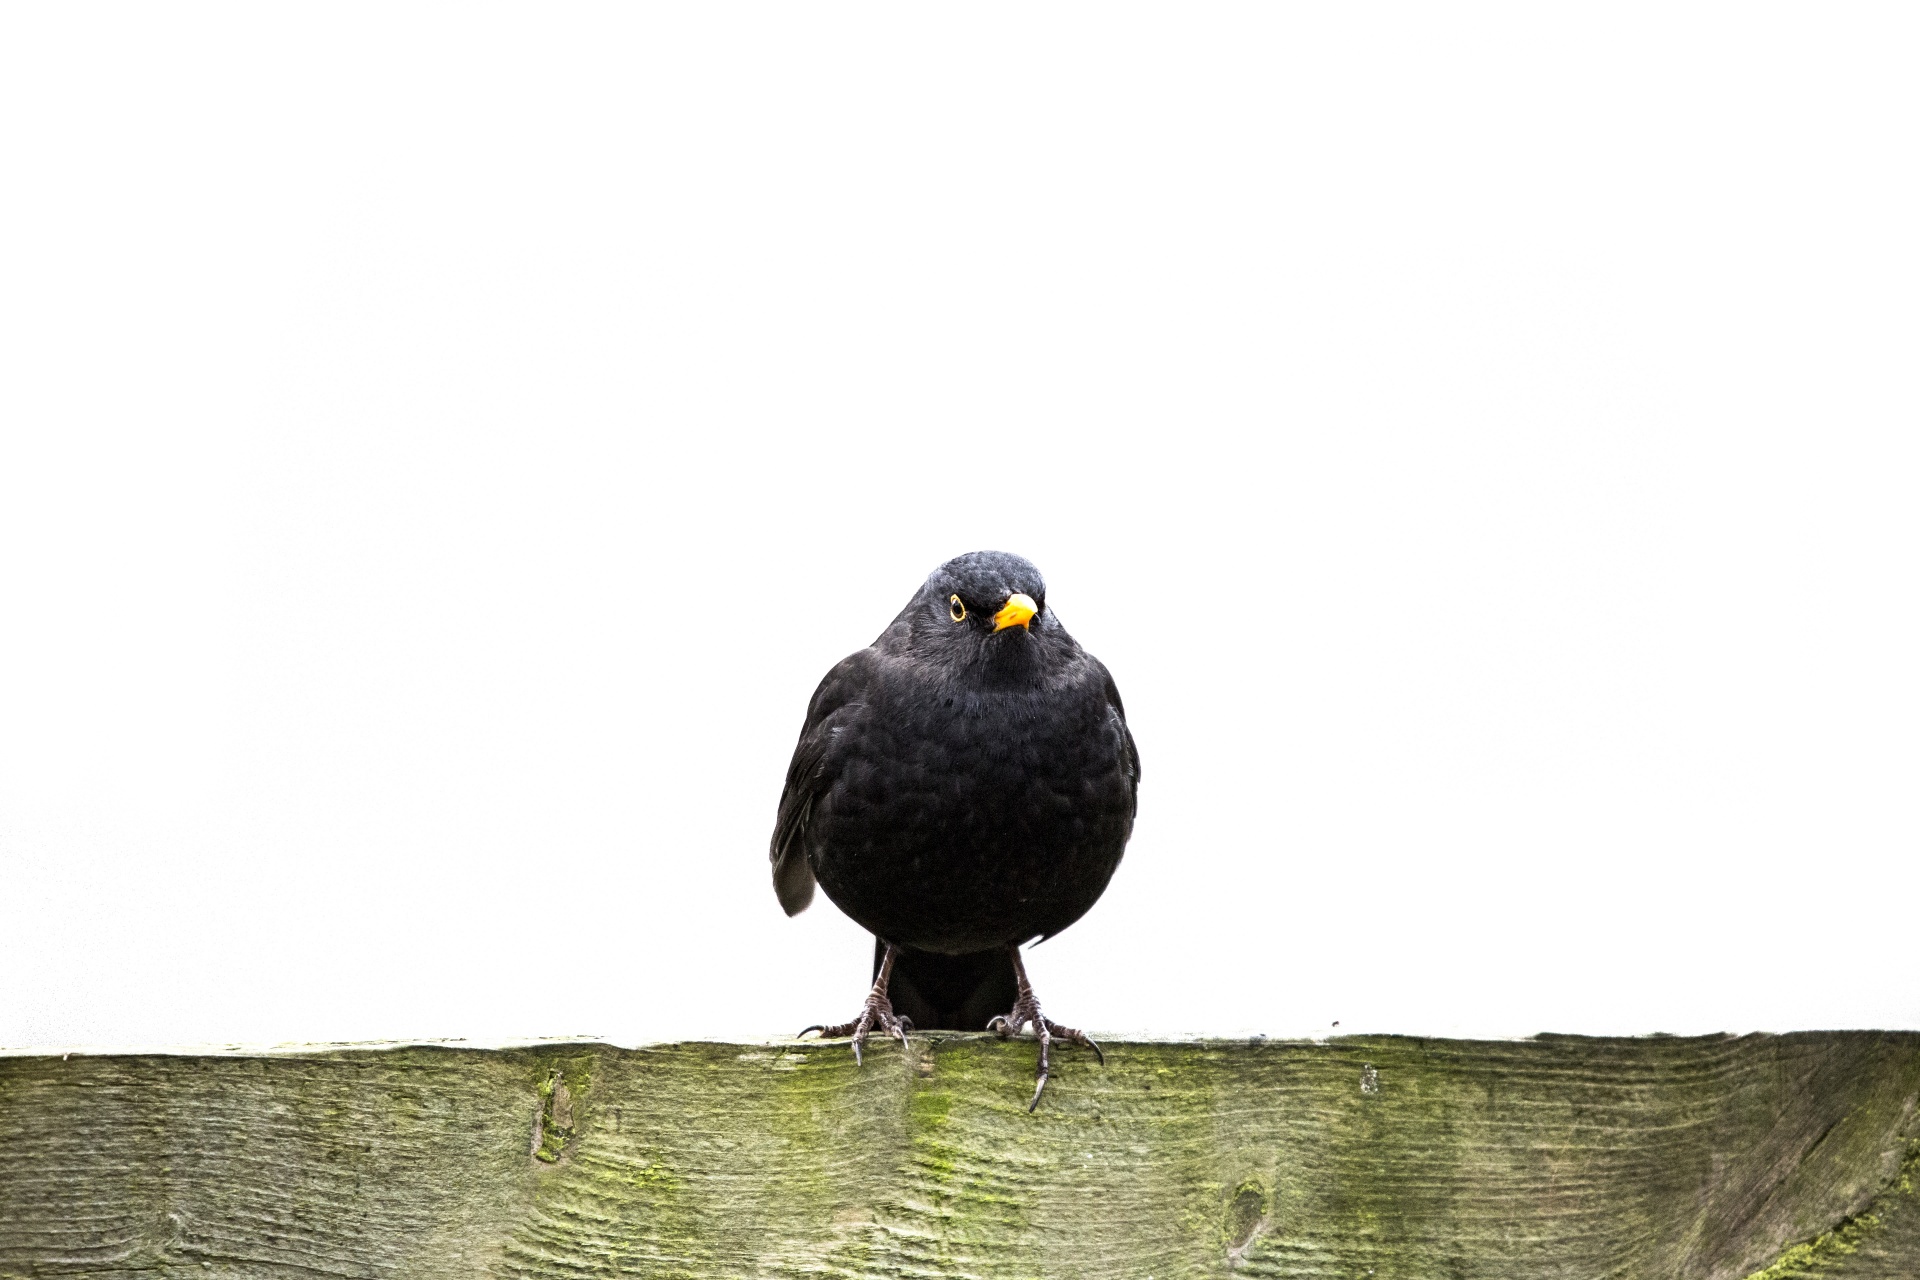 The common blackbird is a species of true thrush. It is also called Eurasian blackbird, or simply blackbird where this does not lead to confusion with a similar-looking local species.